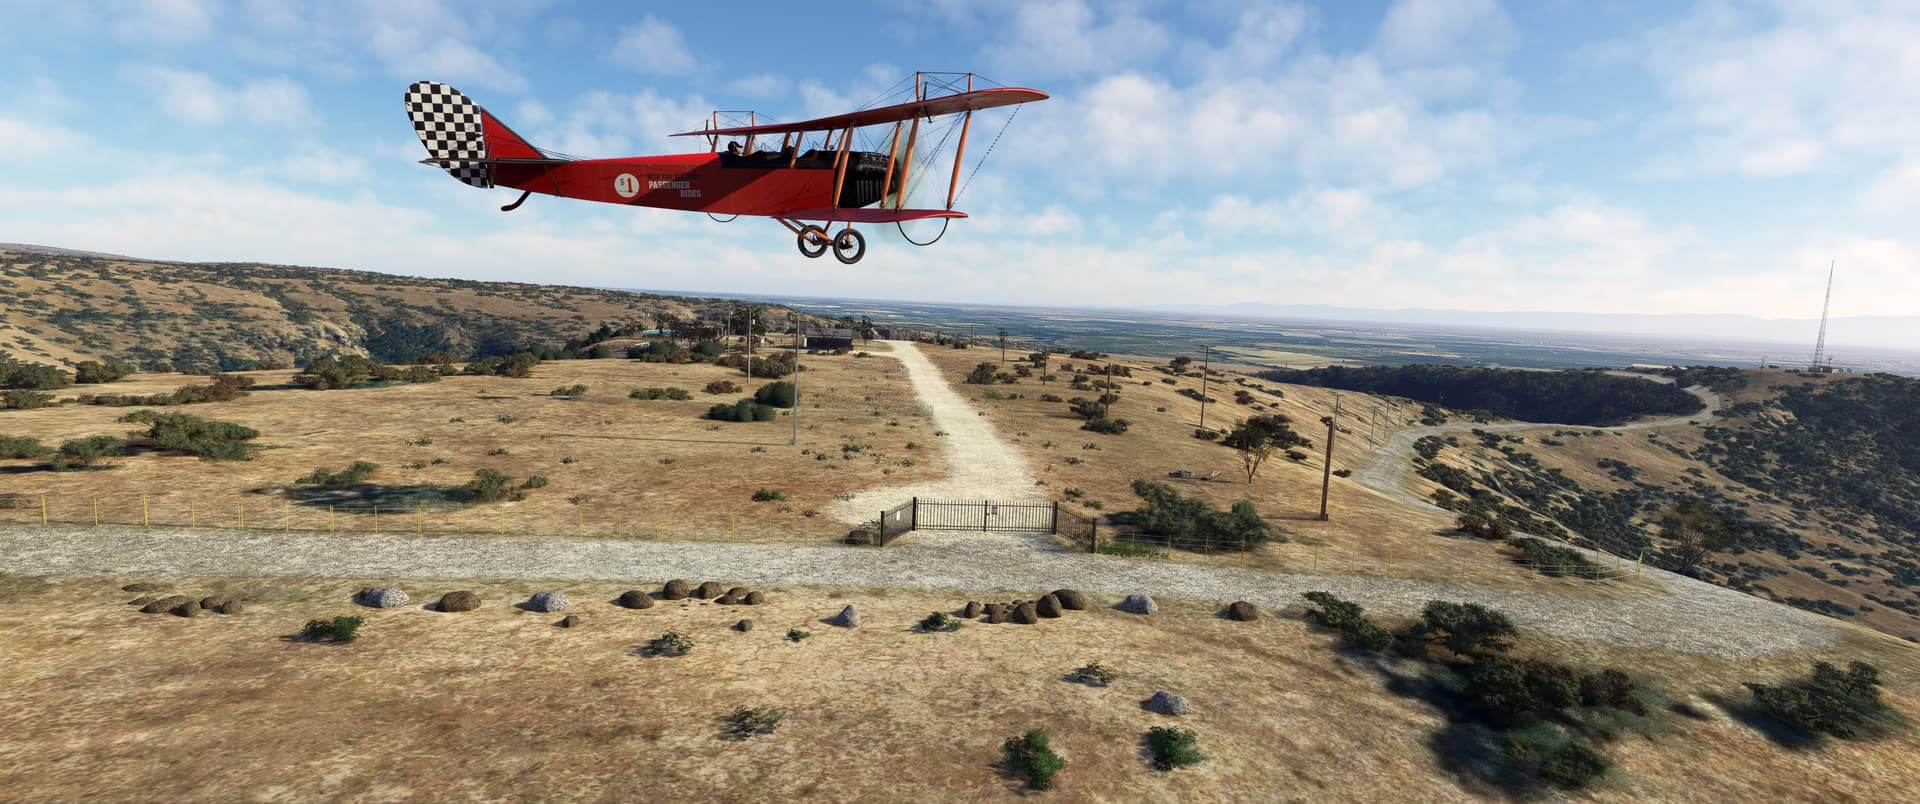 A vintage red colored bi-plane flies low and level over a desert ranch